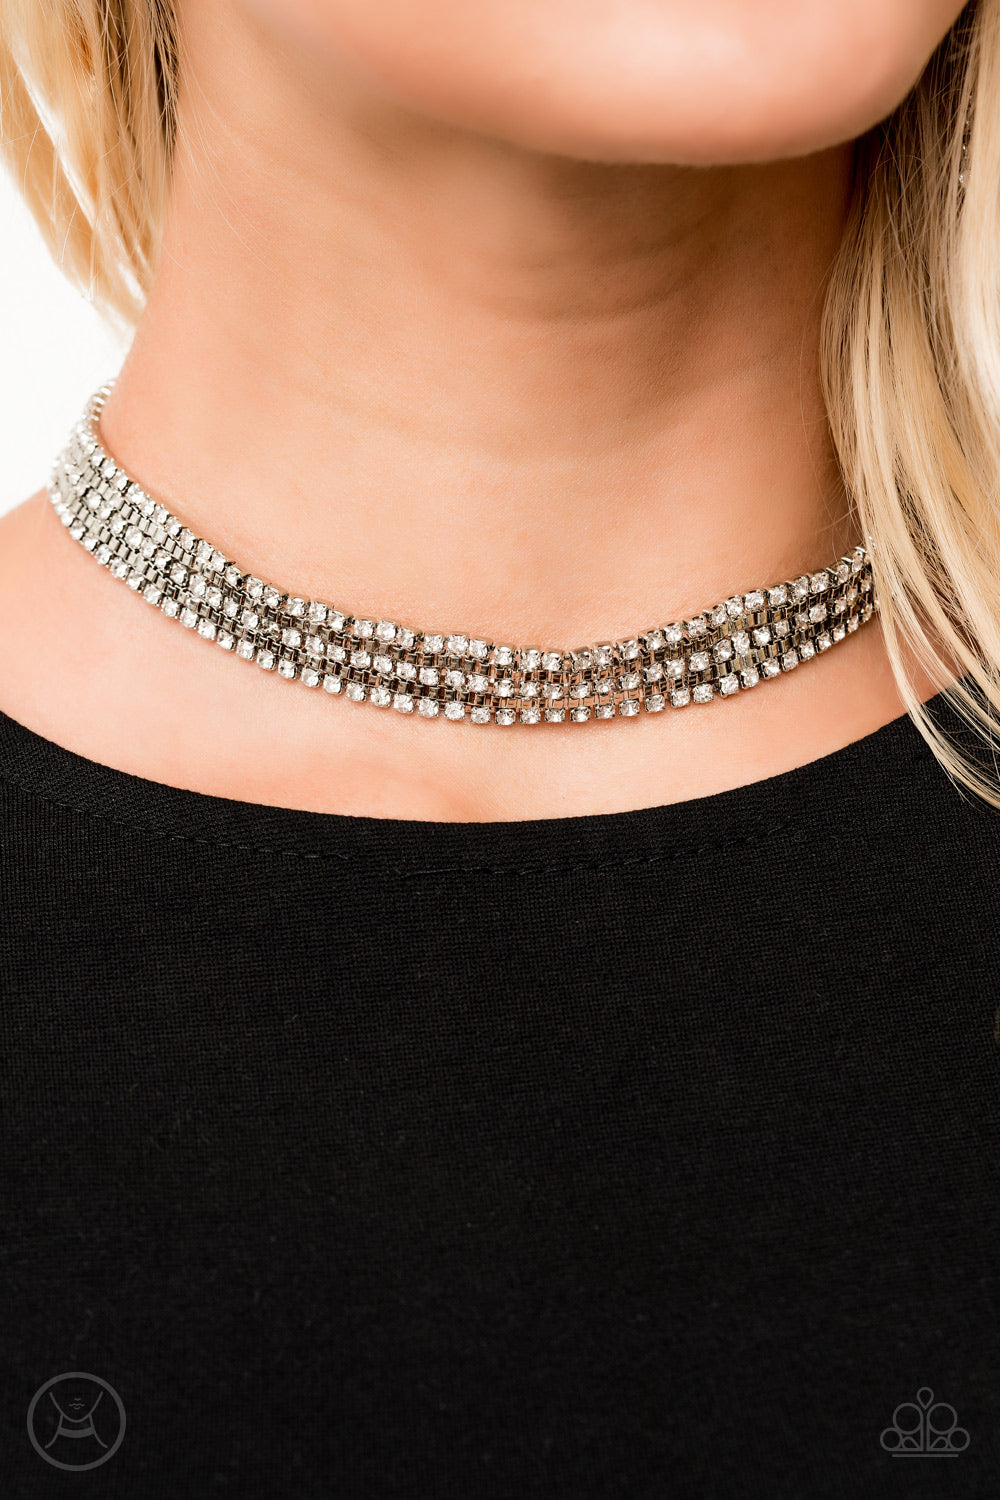 Featuring sleek square fittings, strands of glittery white rhinestones connect with rows of silver box chain around the neck for a glittery twist. Features an adjustable clasp closure.  Sold as one individual choker necklace. Includes one pair of matching earrings.